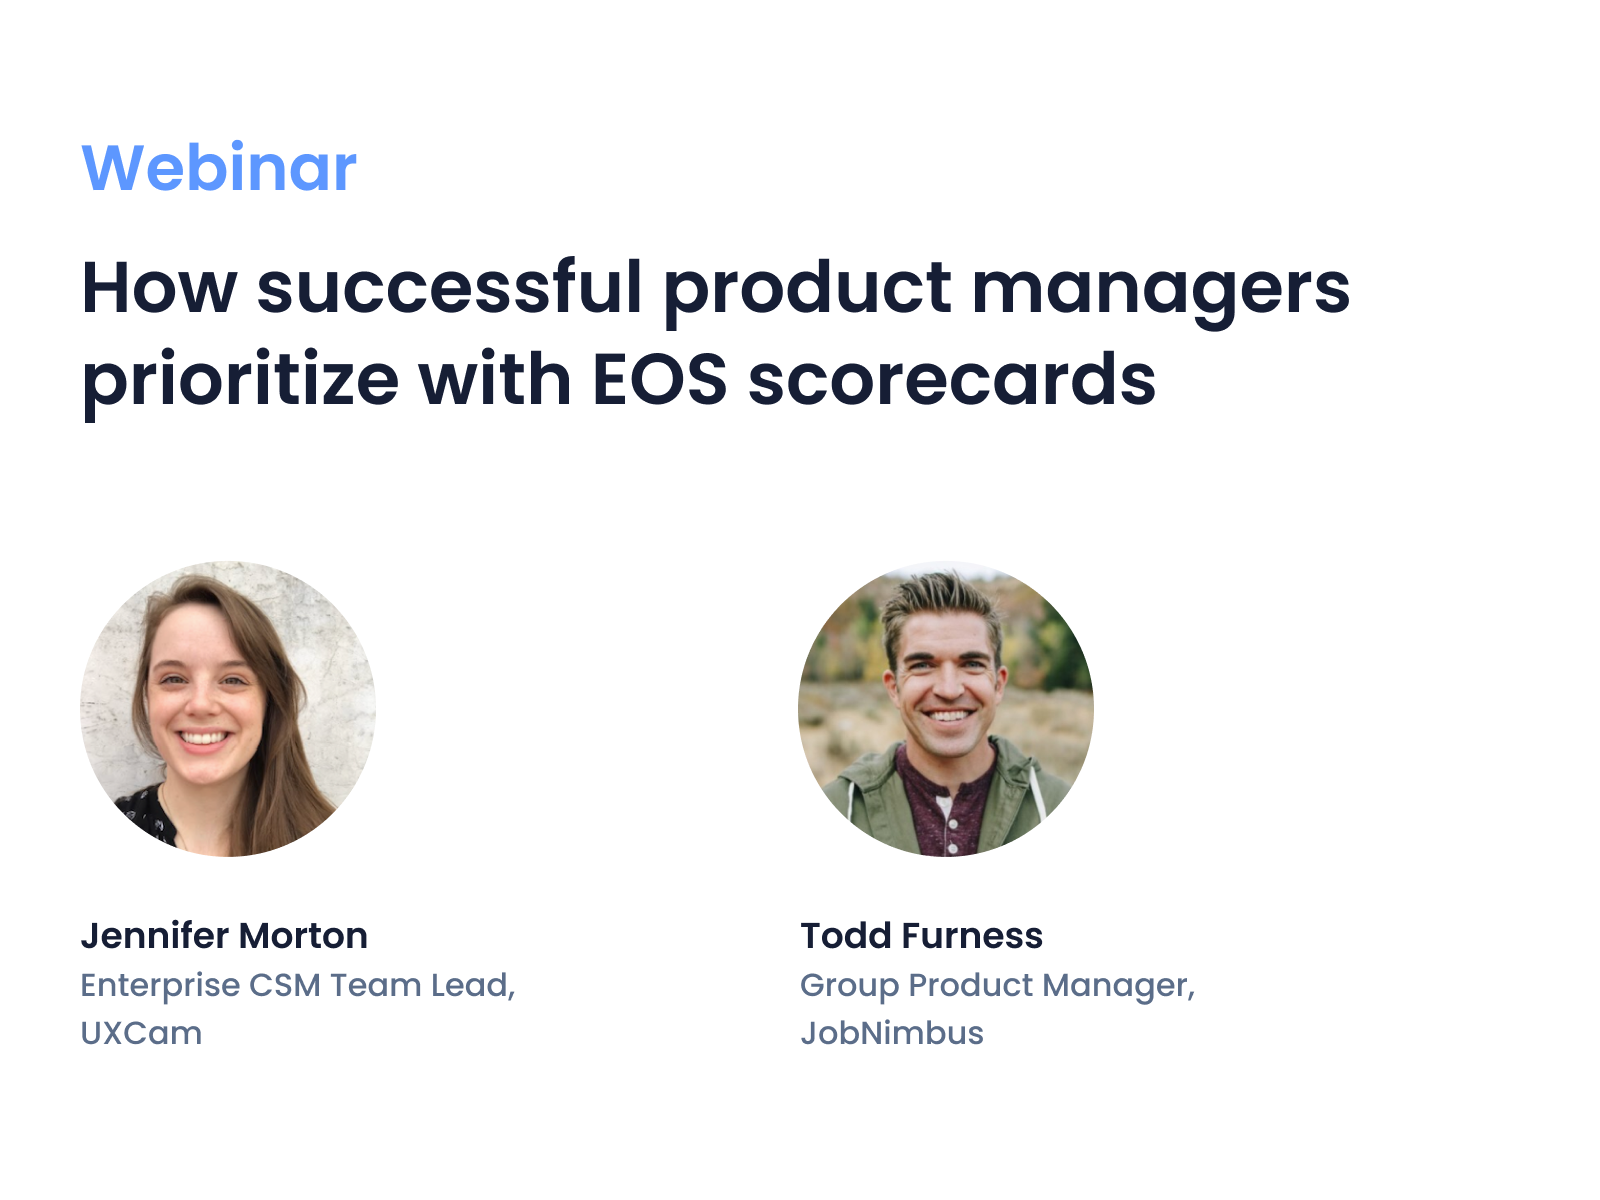 Webinar - How successful product managers prioritize with EOS scorecards